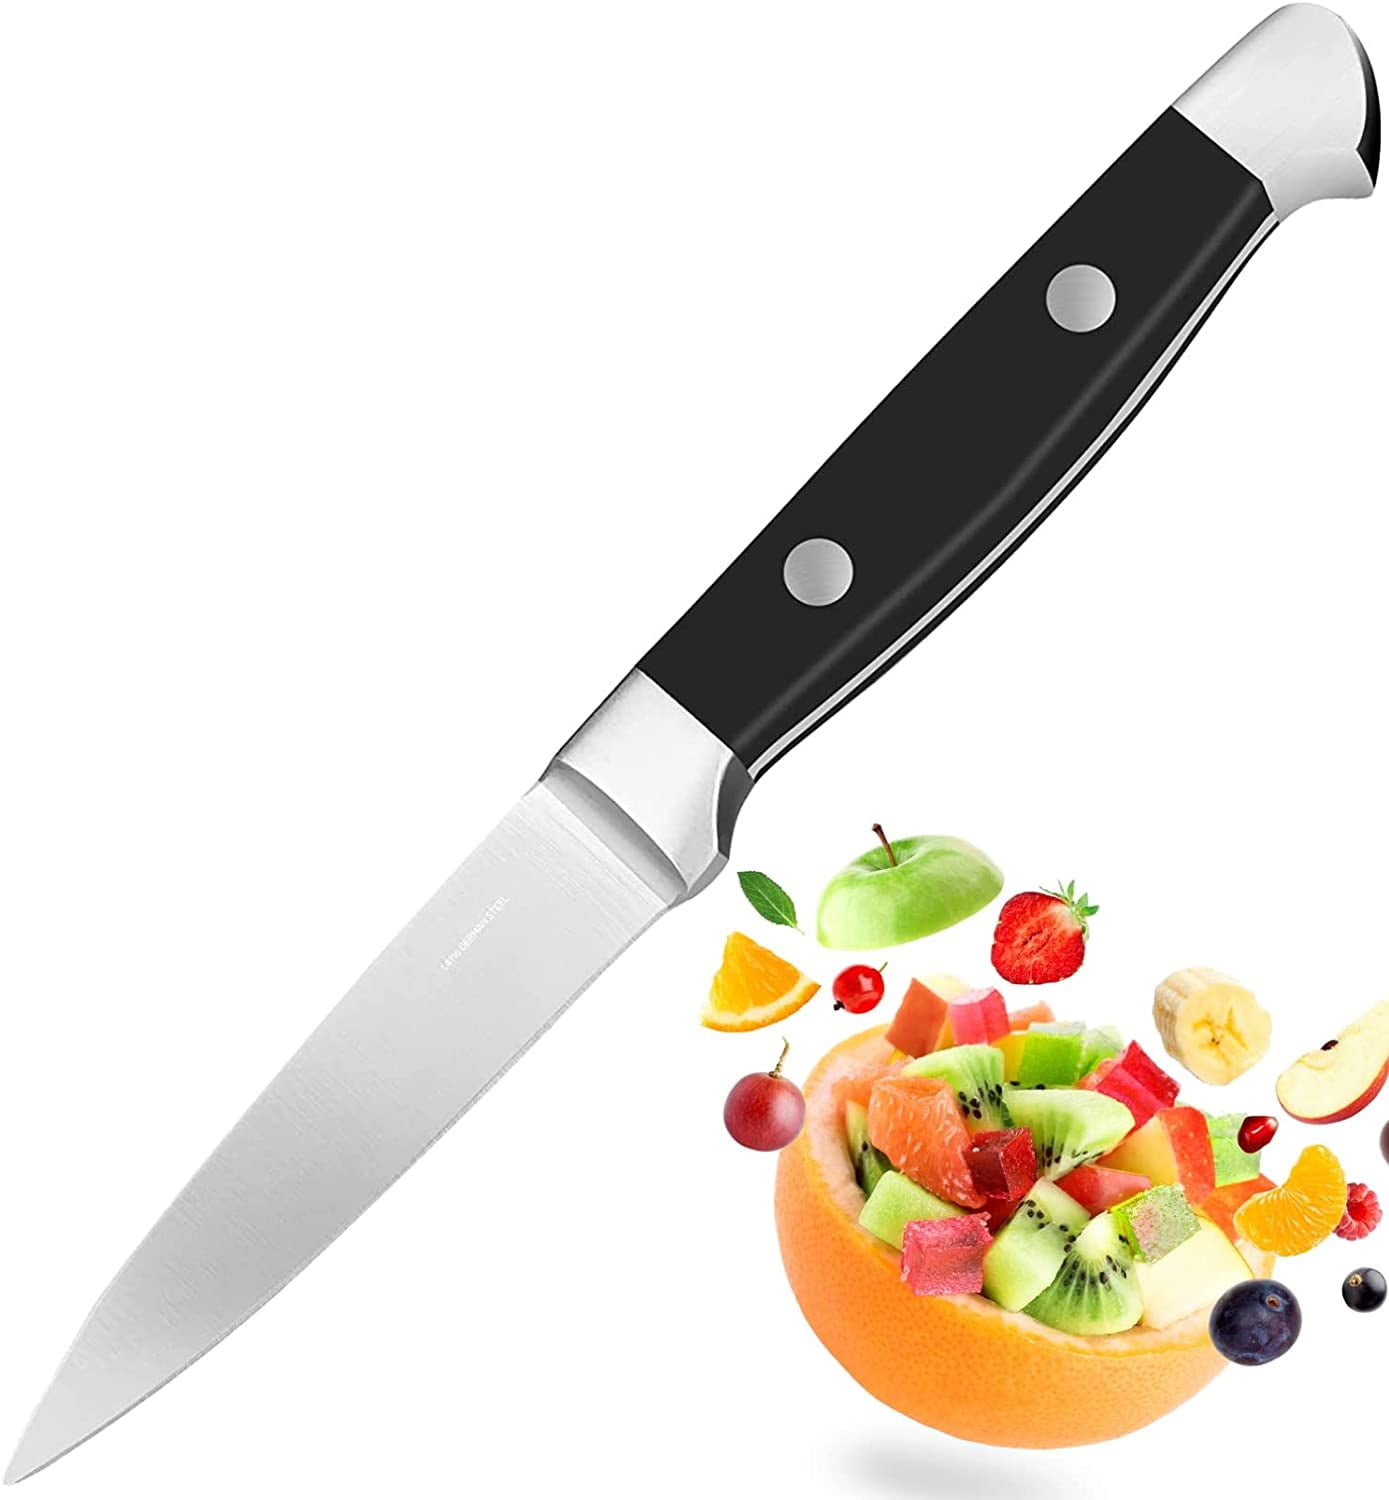 MAD SHARK Paring Knife 5 Inch Small Kitchen Utility Knife, Razor Sharp  Fruit Petty Knife with Gift Box, Ideal for Slicing, Chopping, Dicing and  Coring